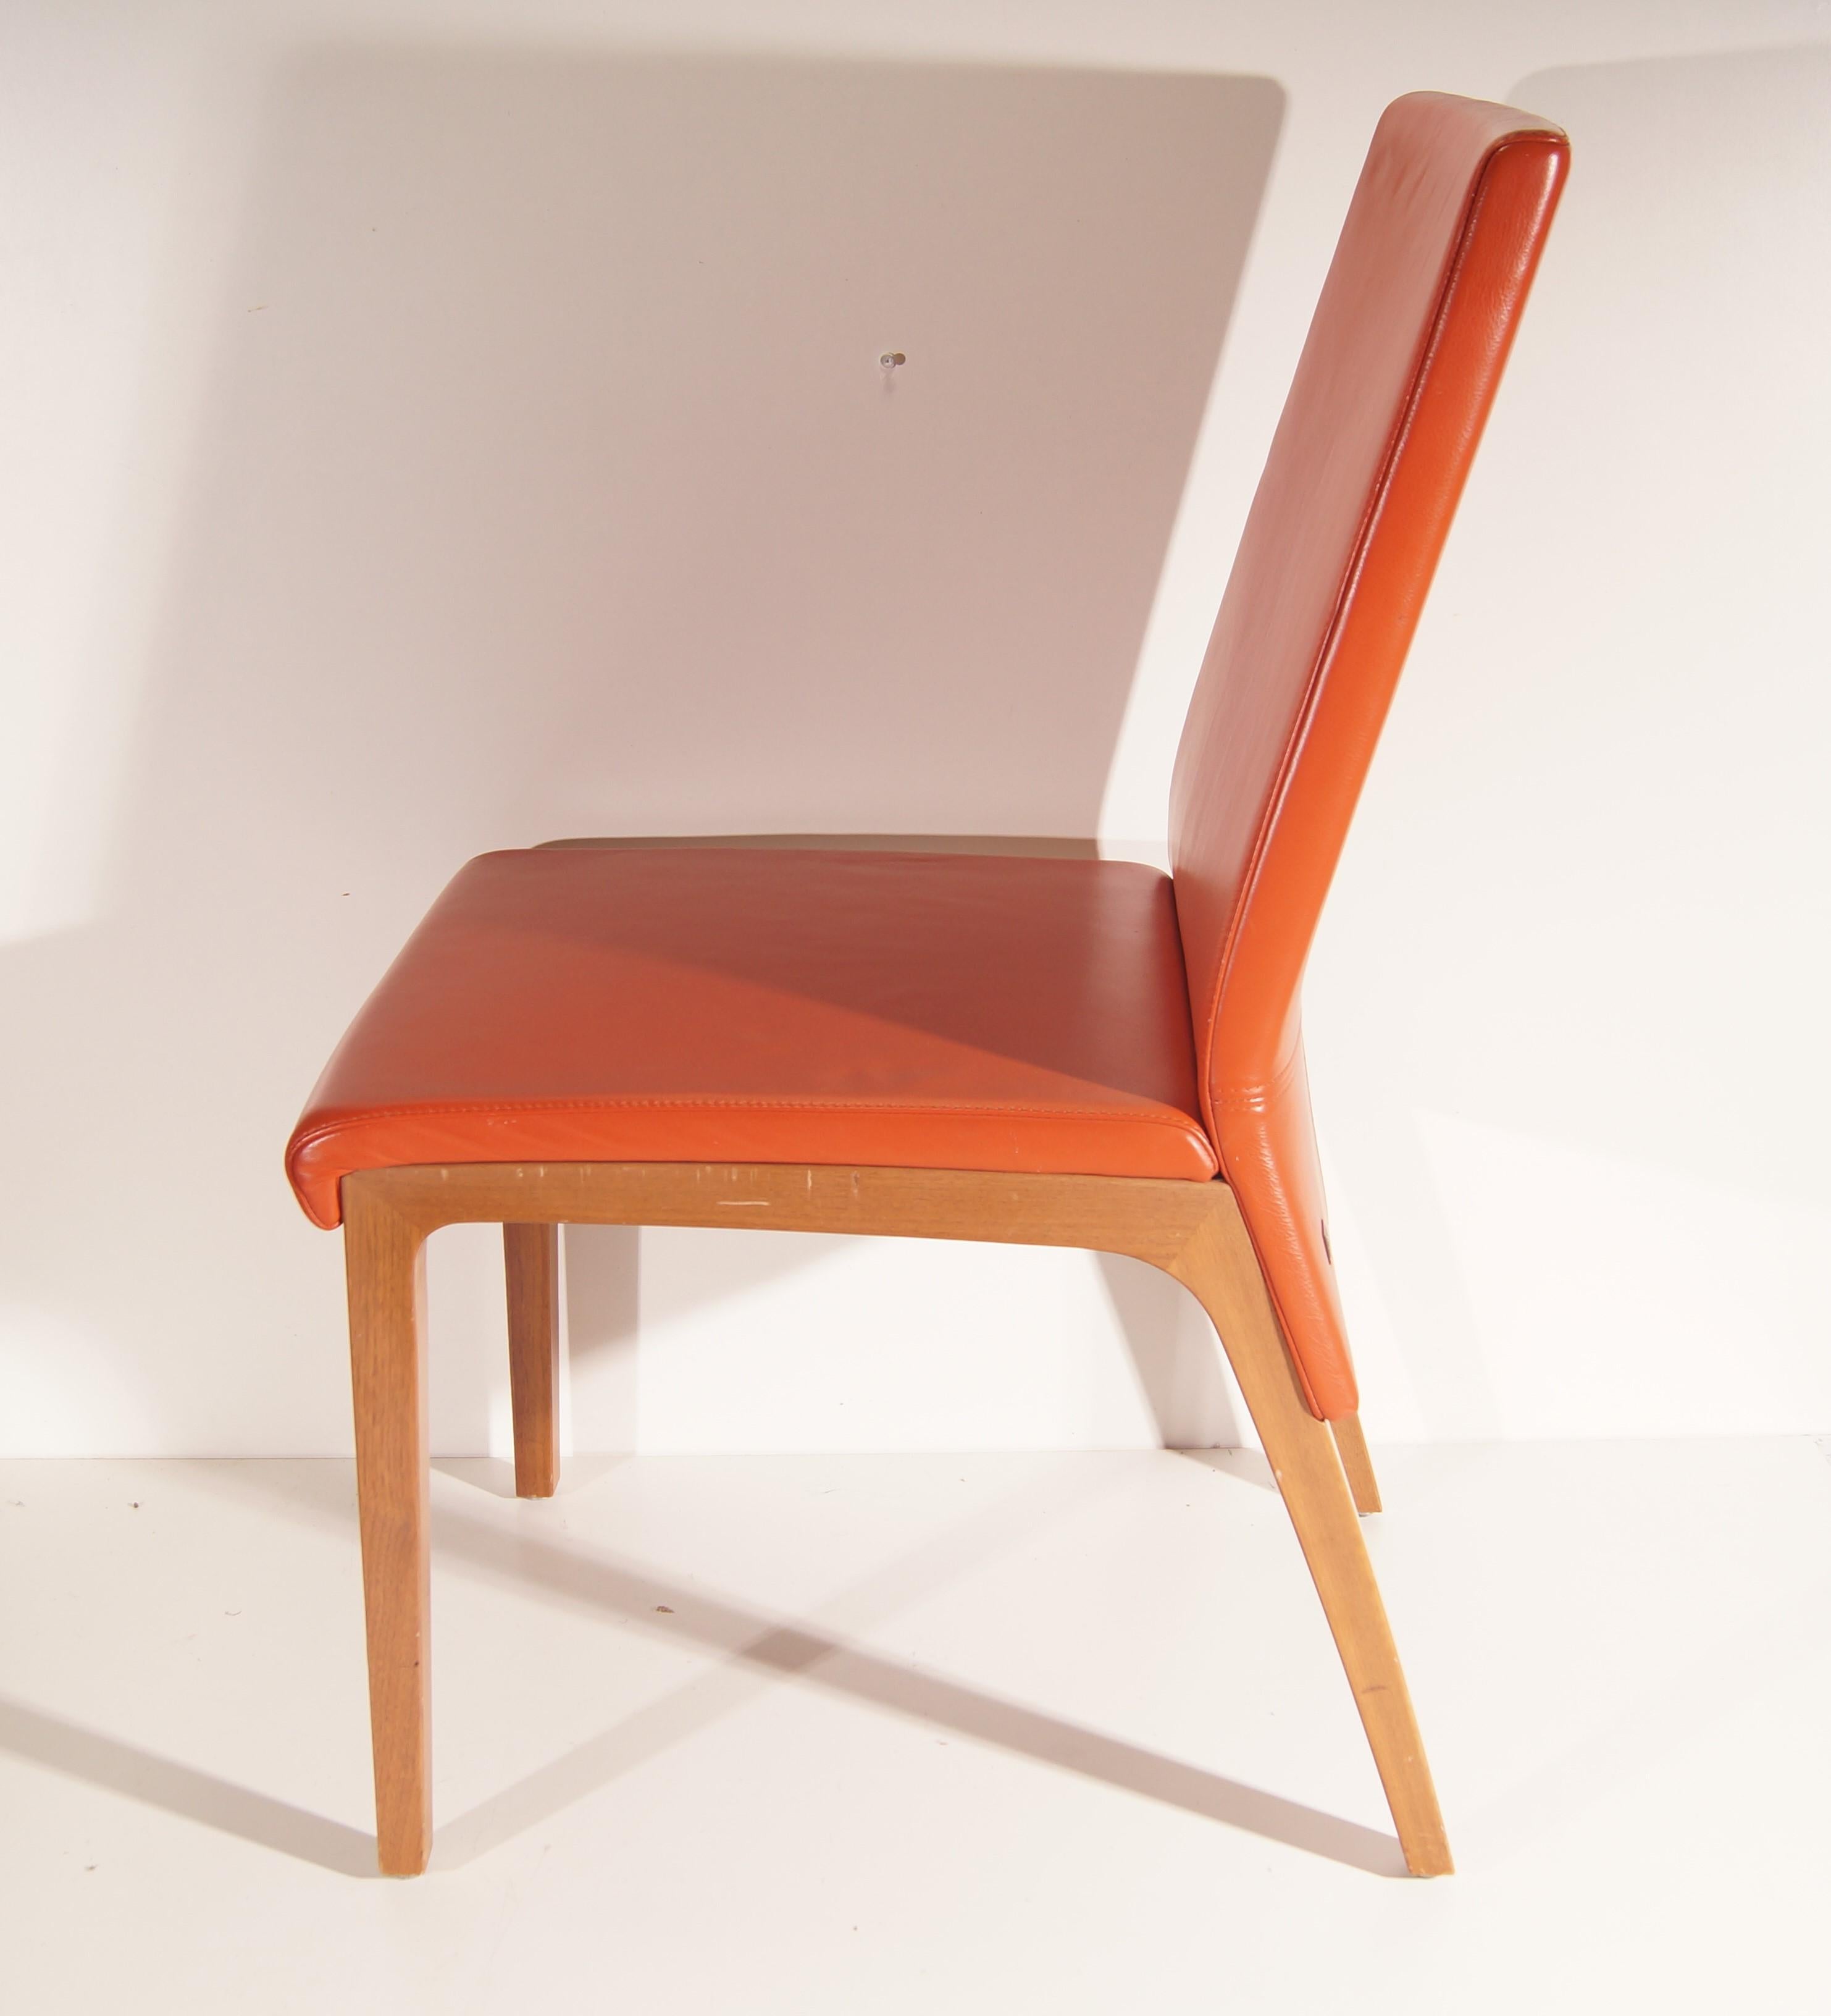 Rolf Benz - Dining room chair in orange leather 1